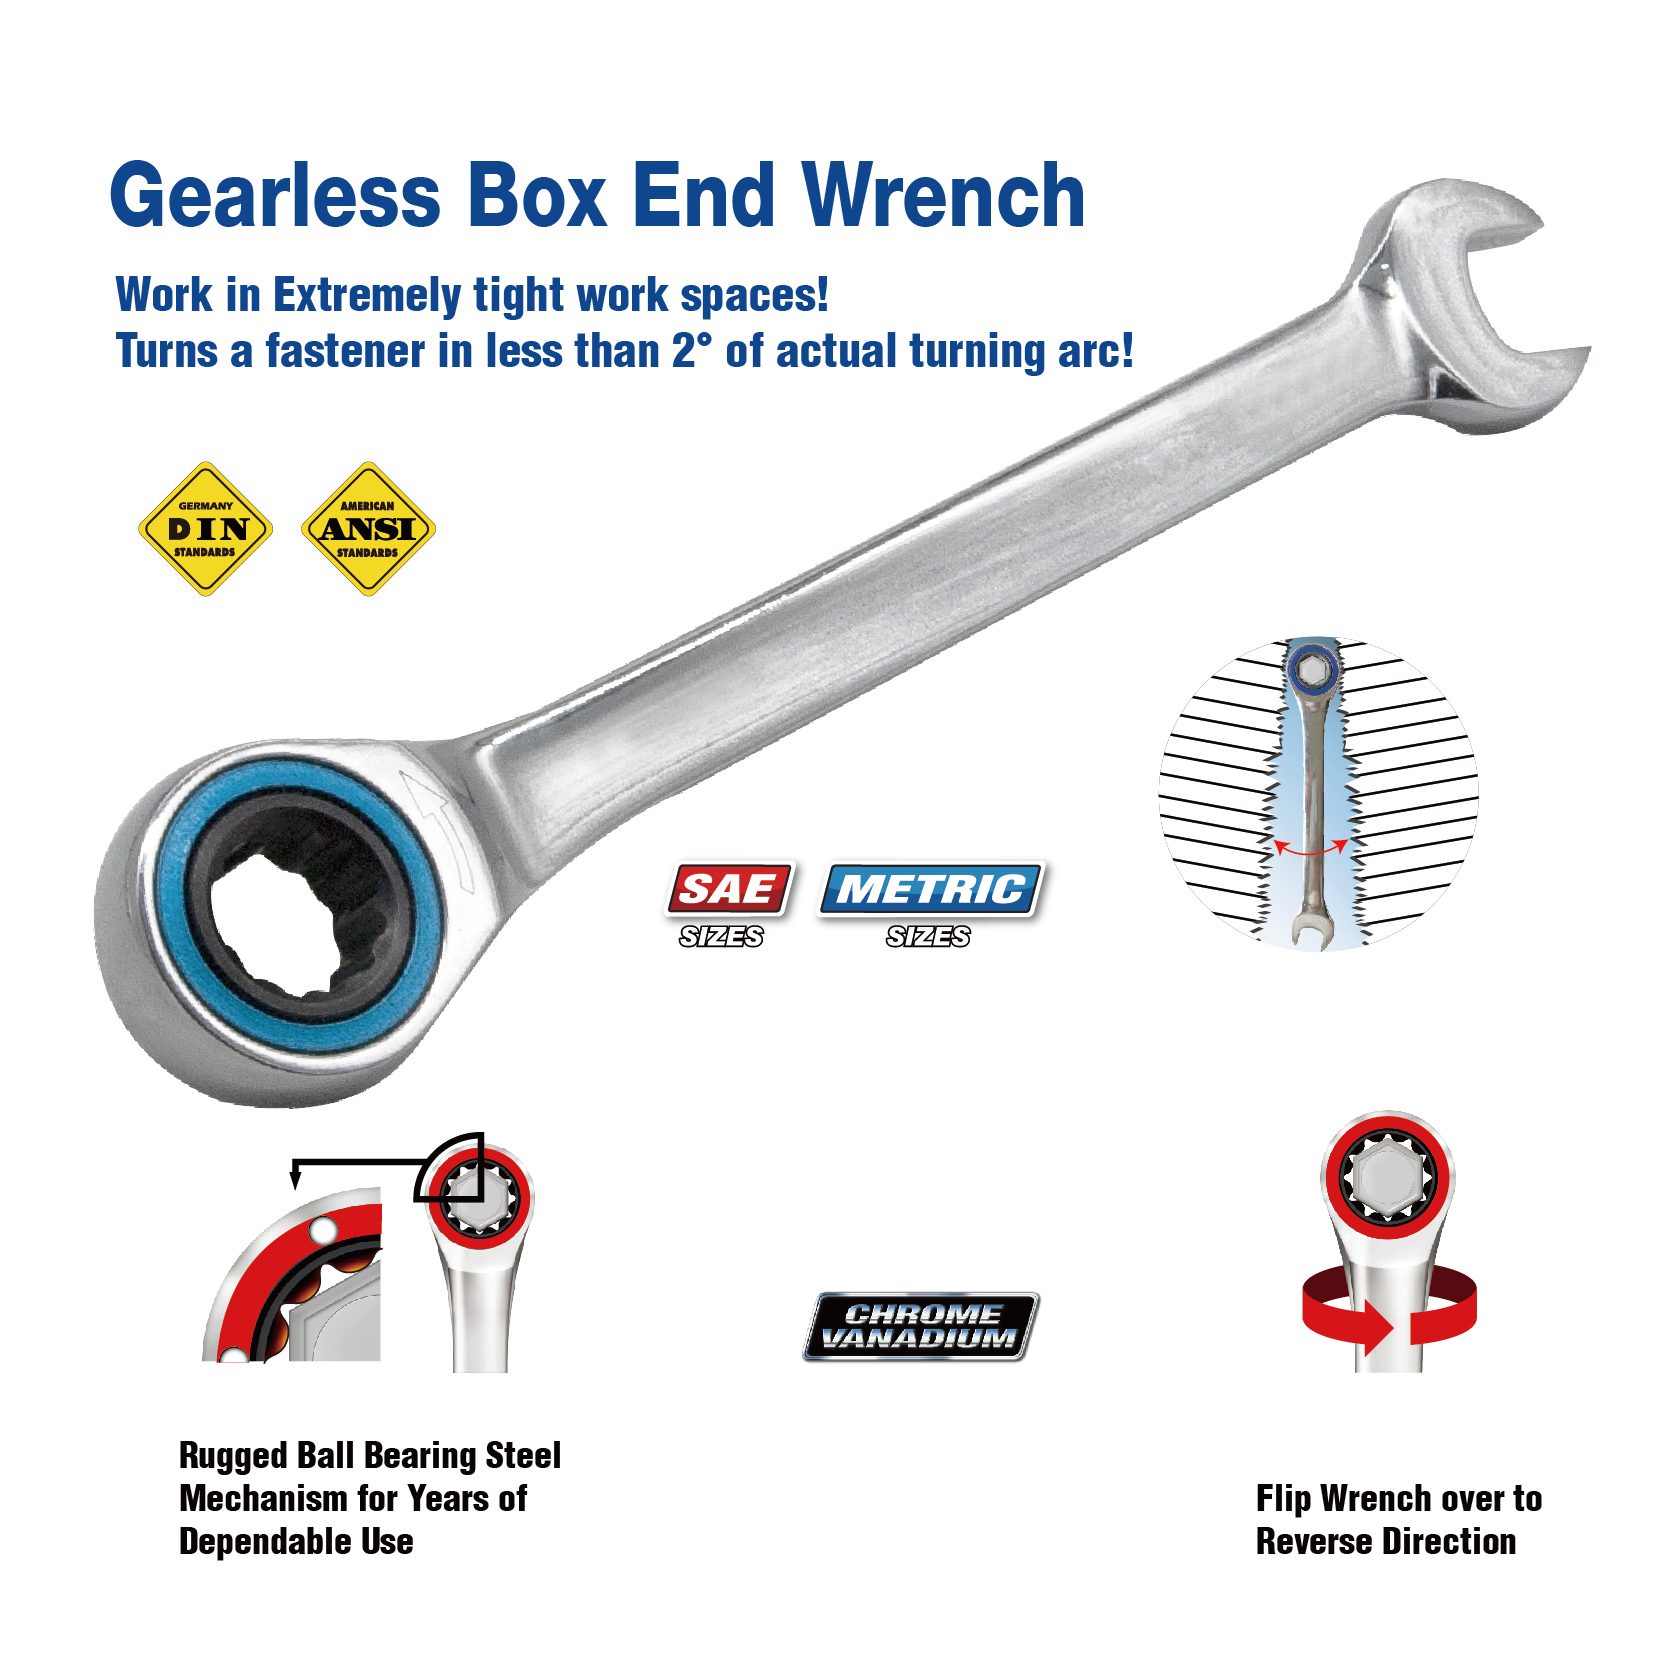 GEARLESS COMBINATION WRENCH SET